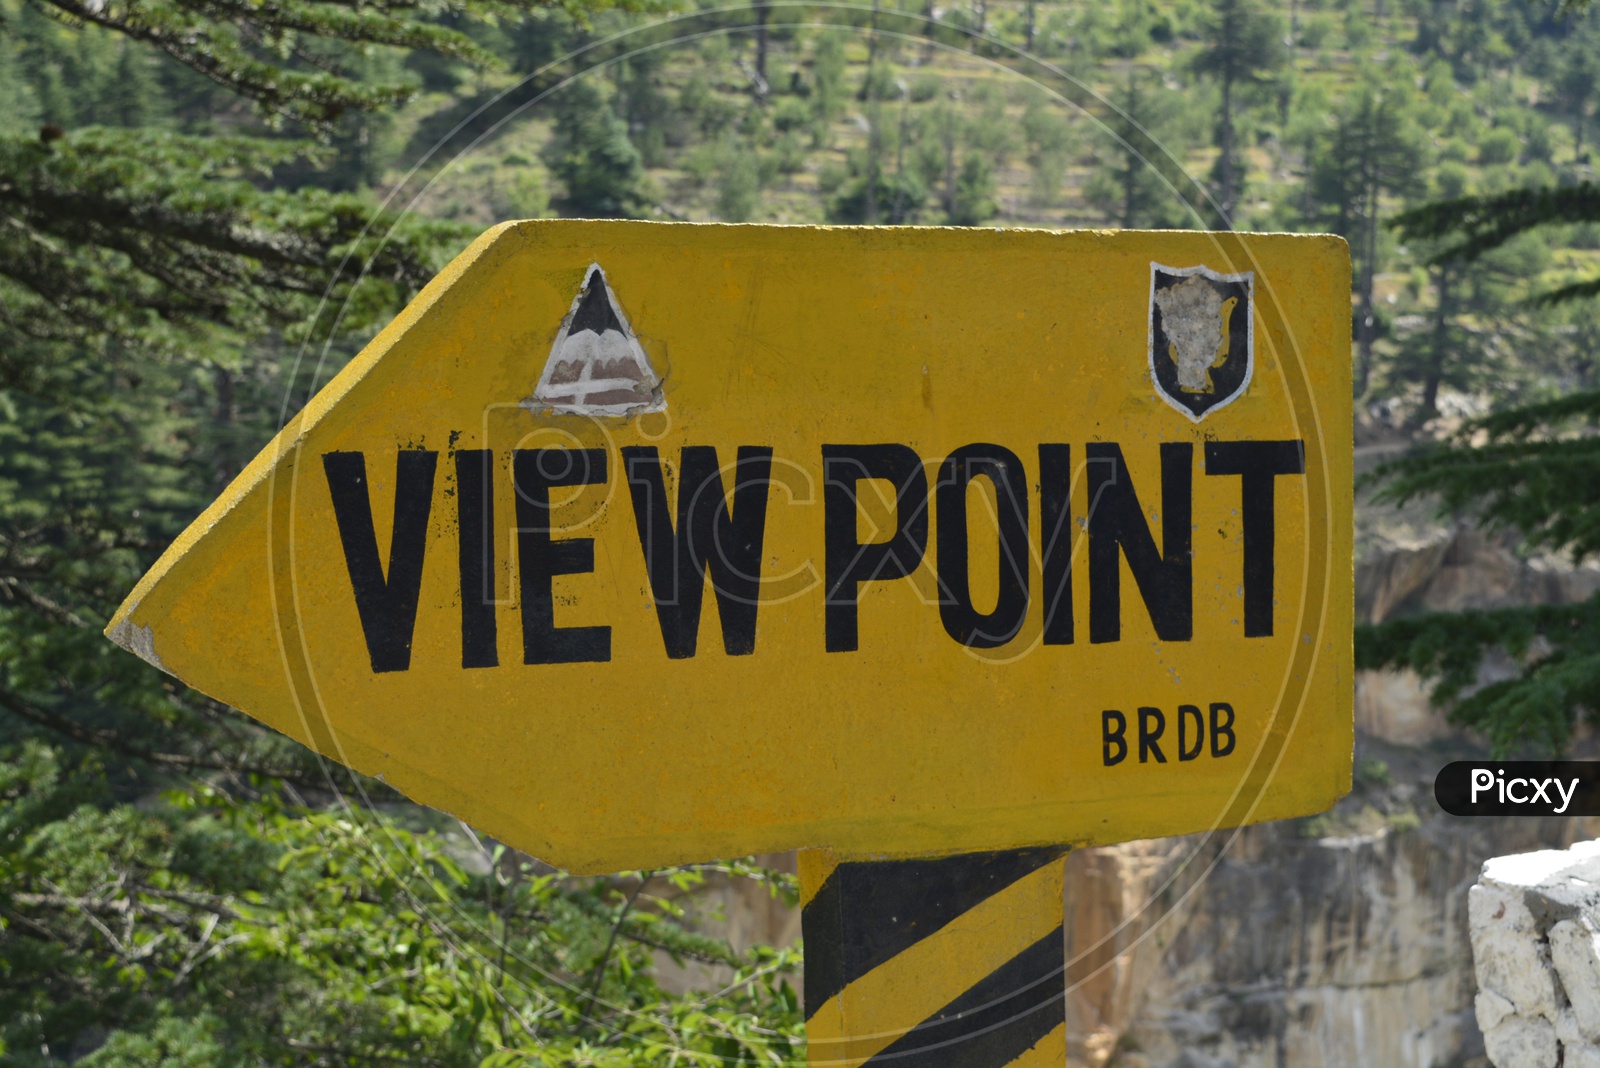 A yellow sign board with view point written on it.